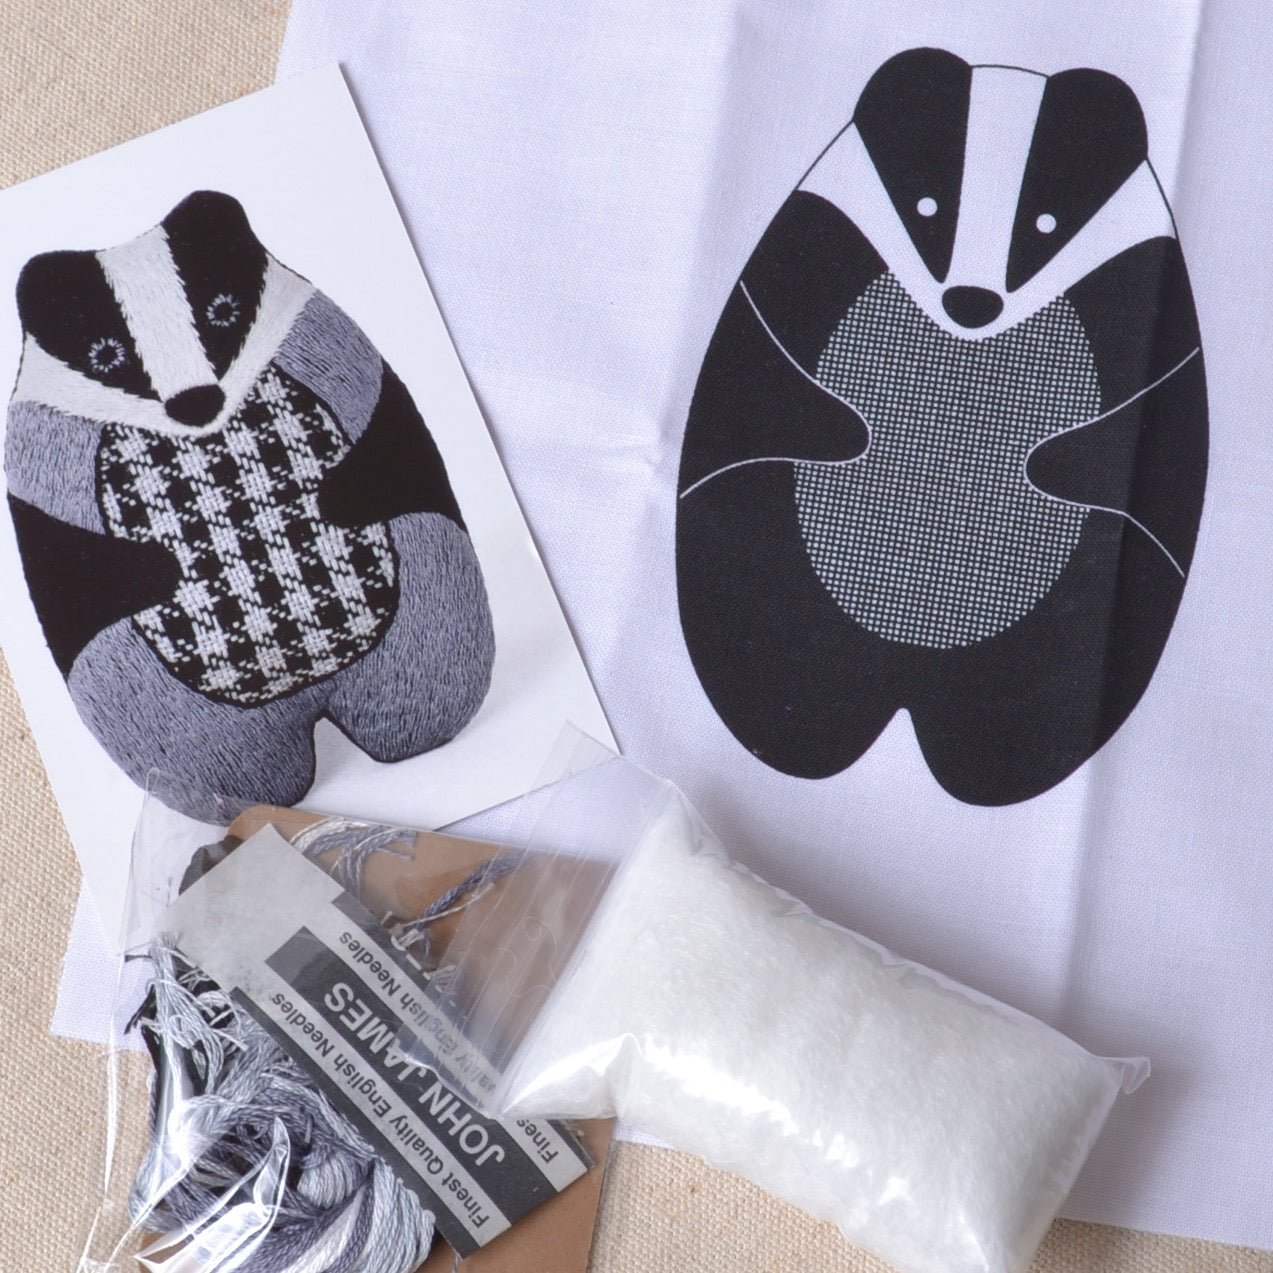 Embroidery kit, Badger stuffie